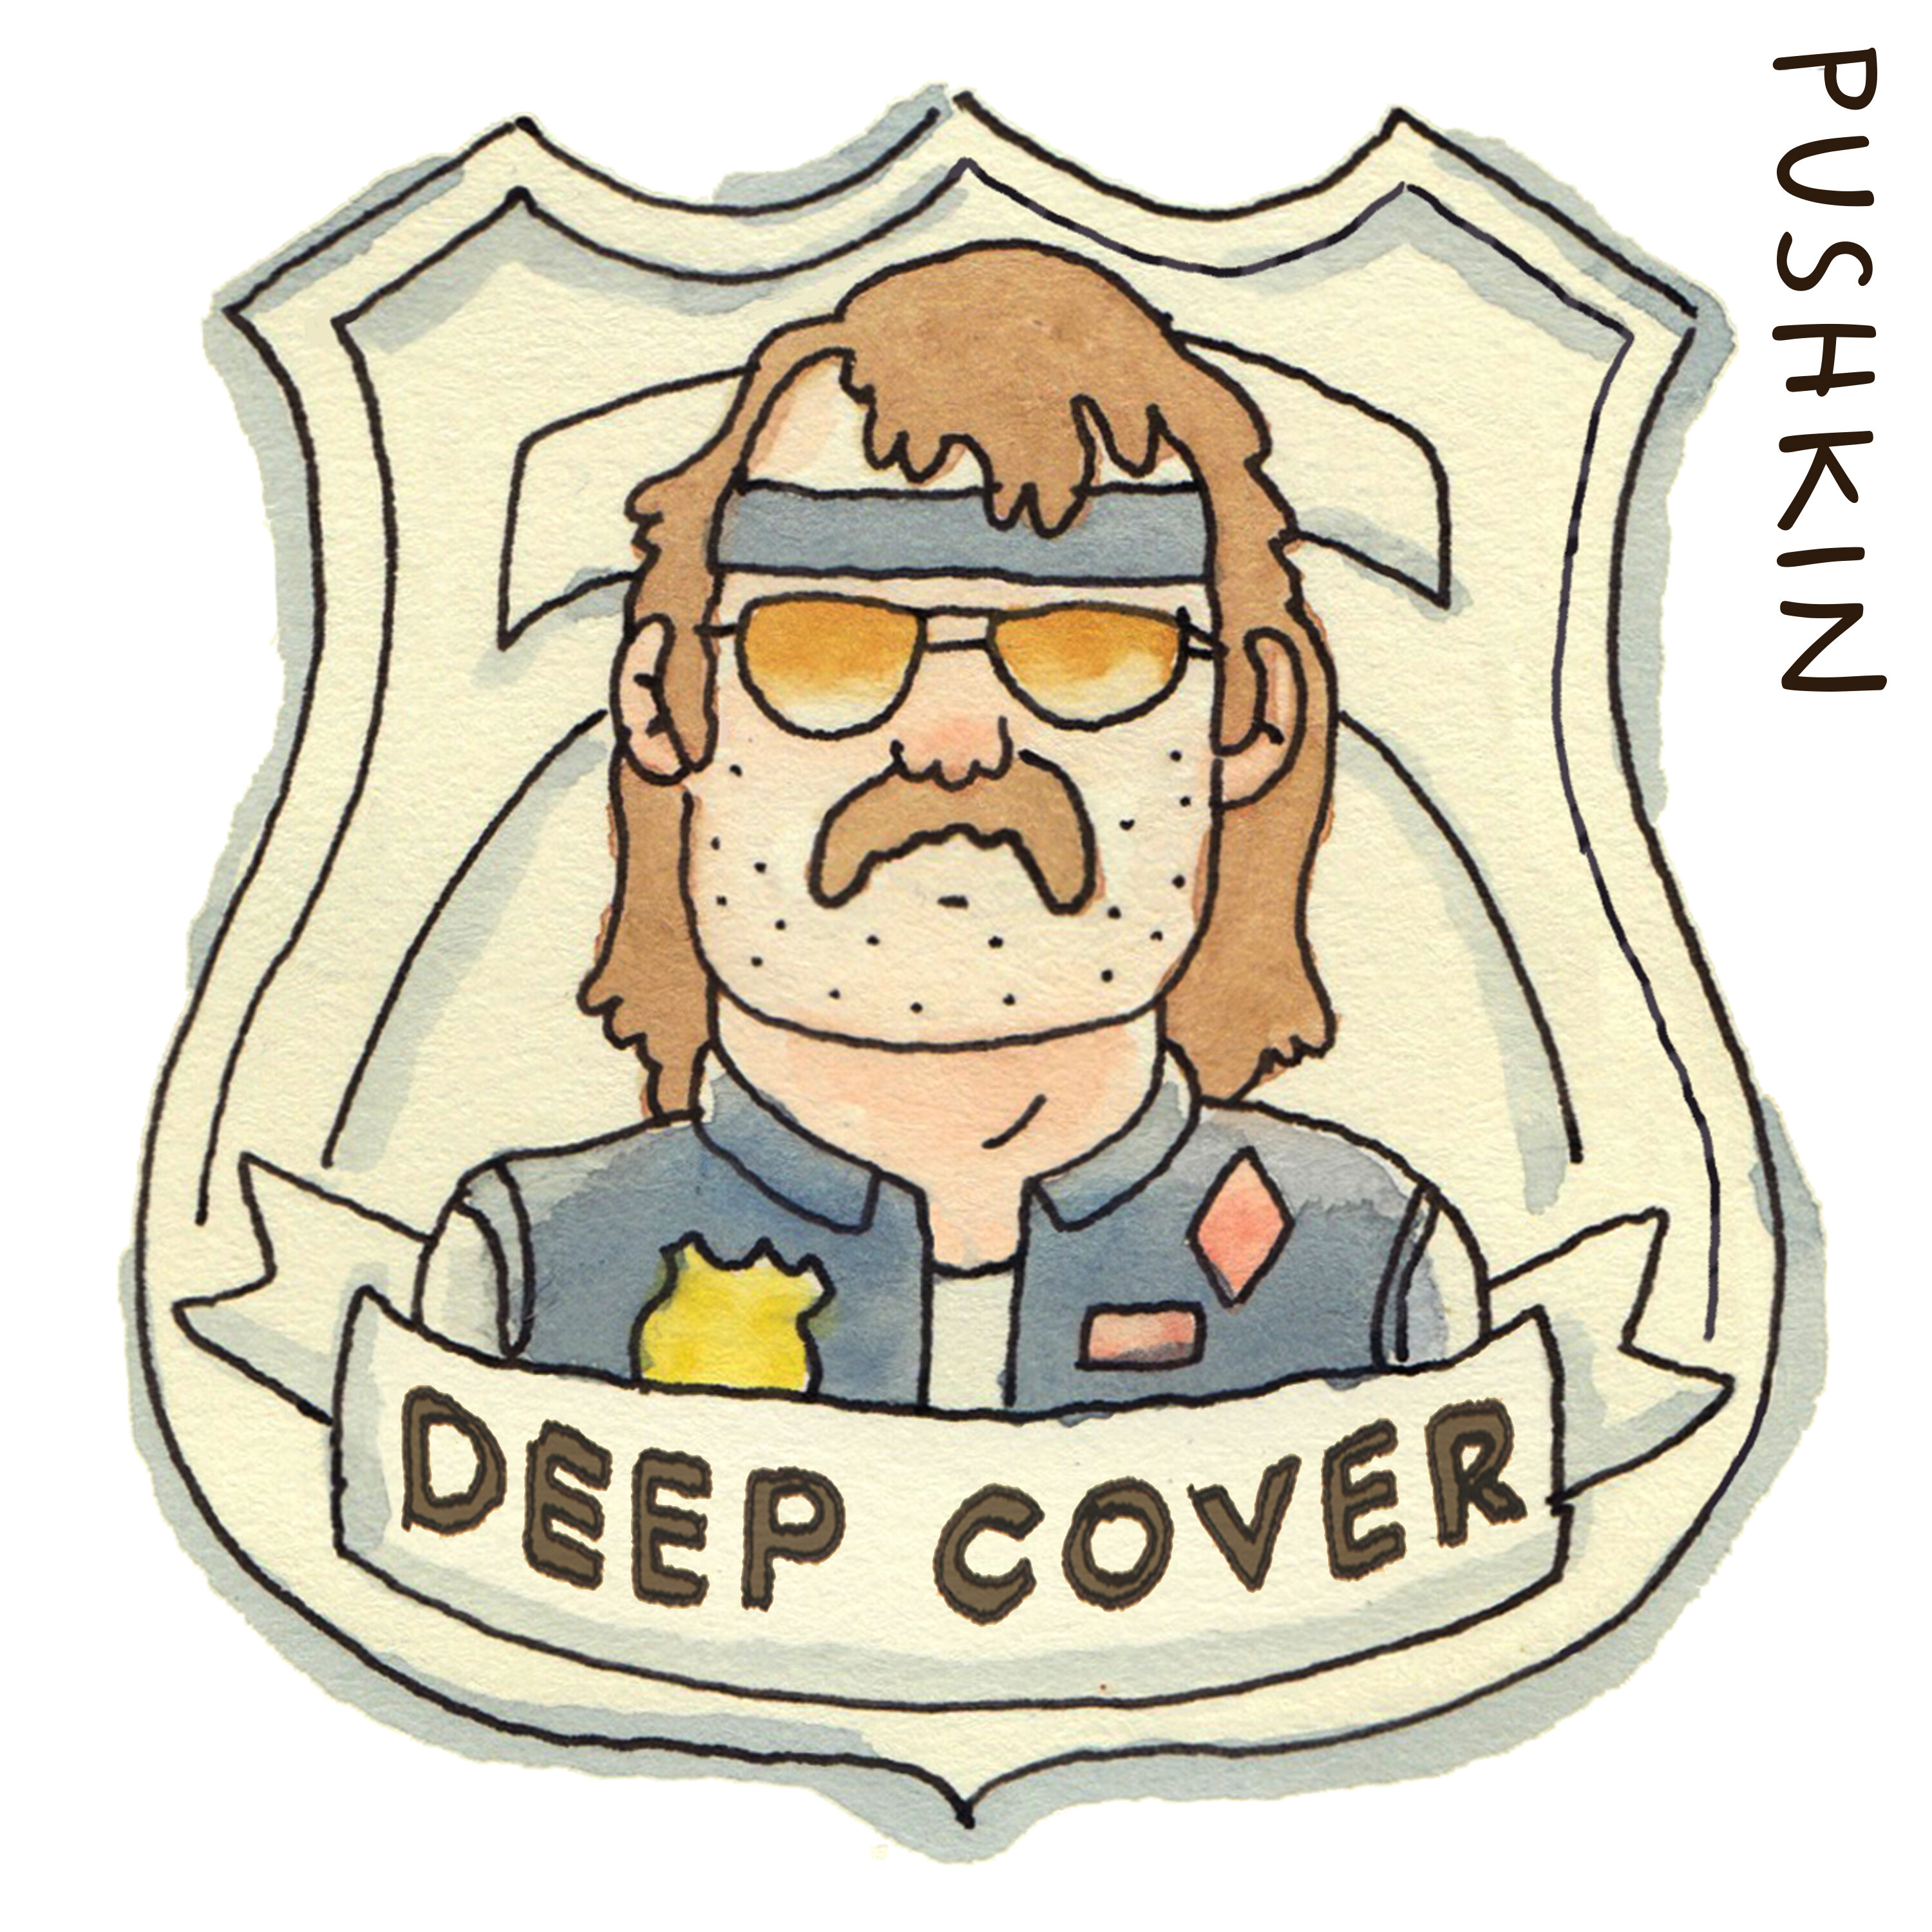 Introducing Deep Cover